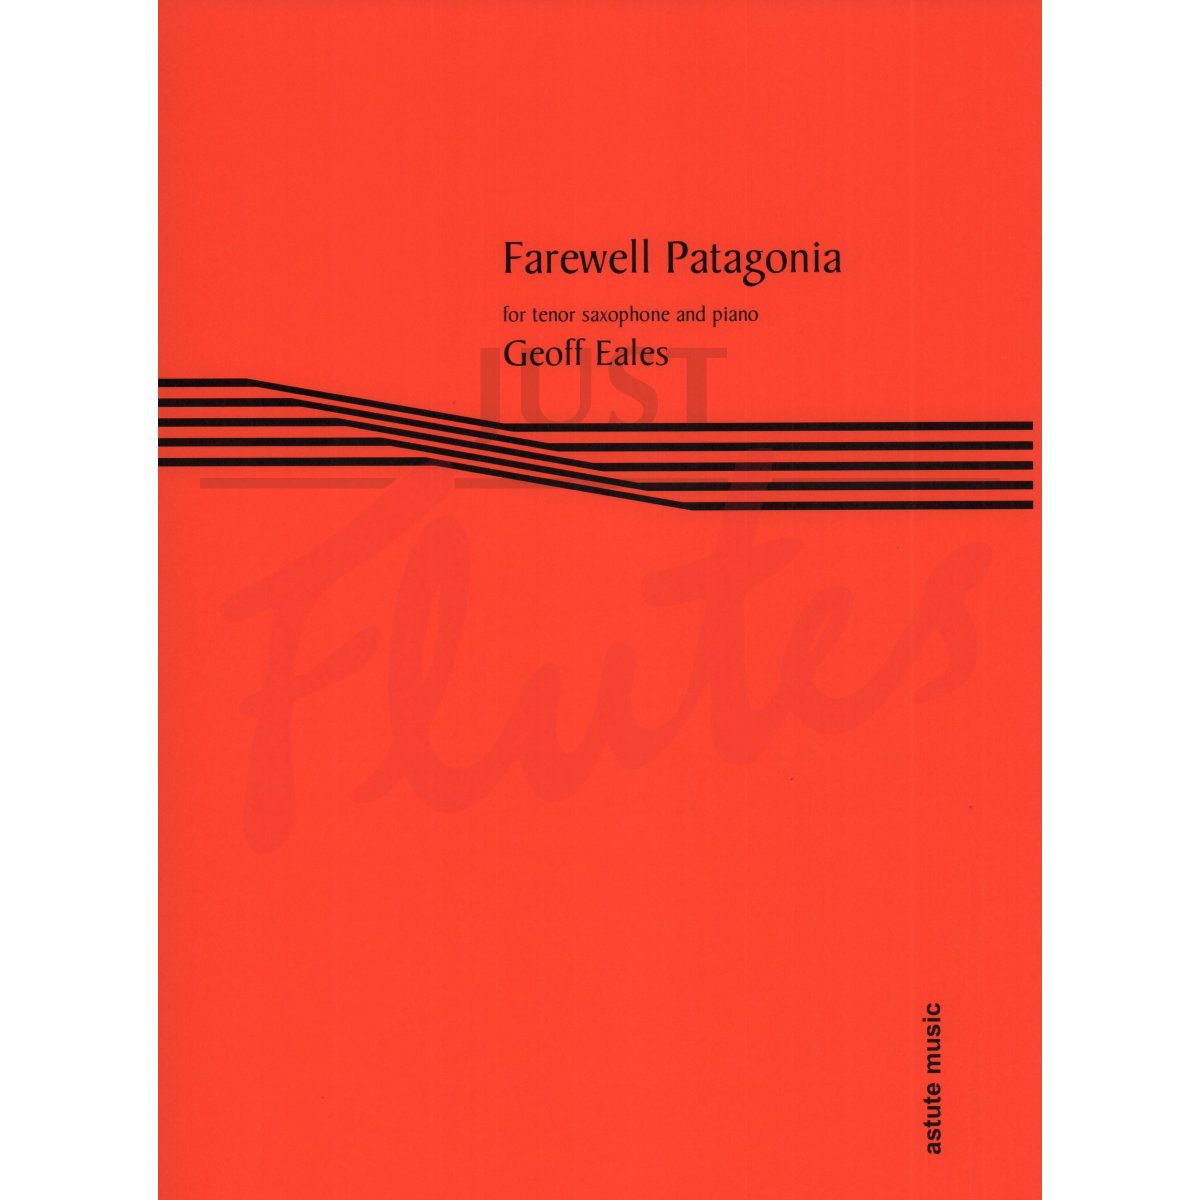 Farewell Patagonia for Tenor Saxophone and Piano